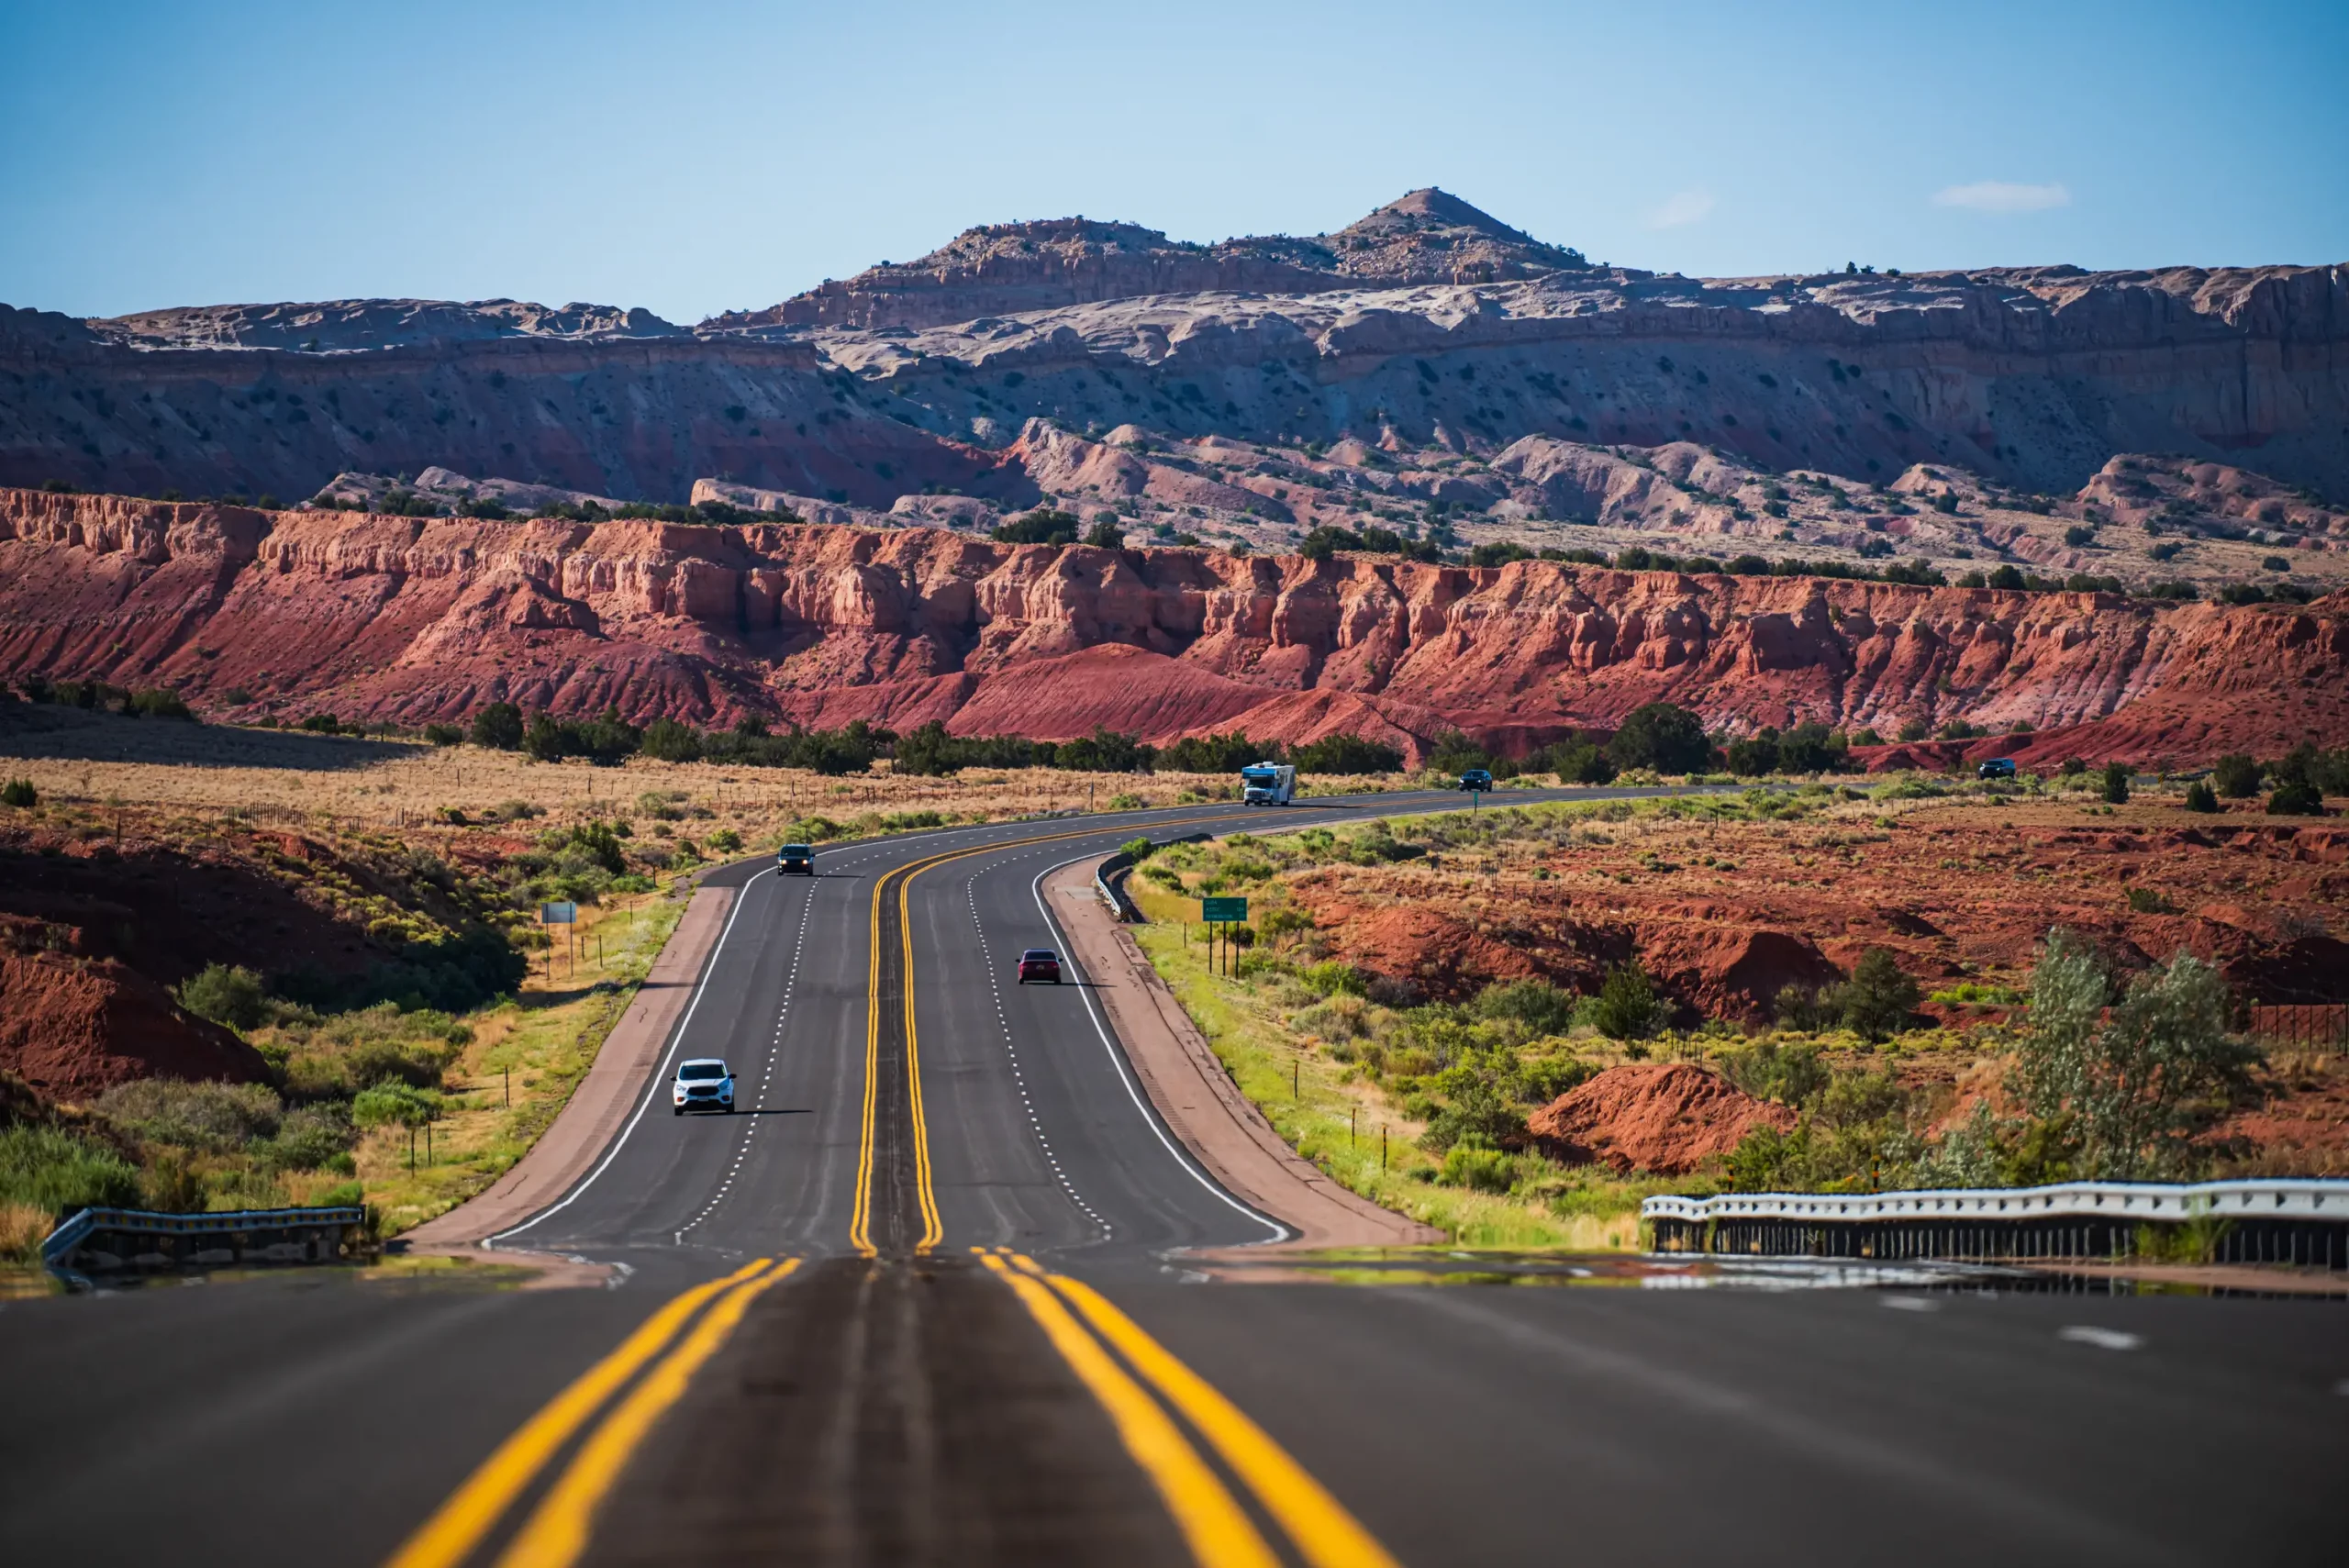 A winding highway in a picturesque landscape with vibrant red rock formations under a clear blue sky, symbolizing high-quality road infrastructure.